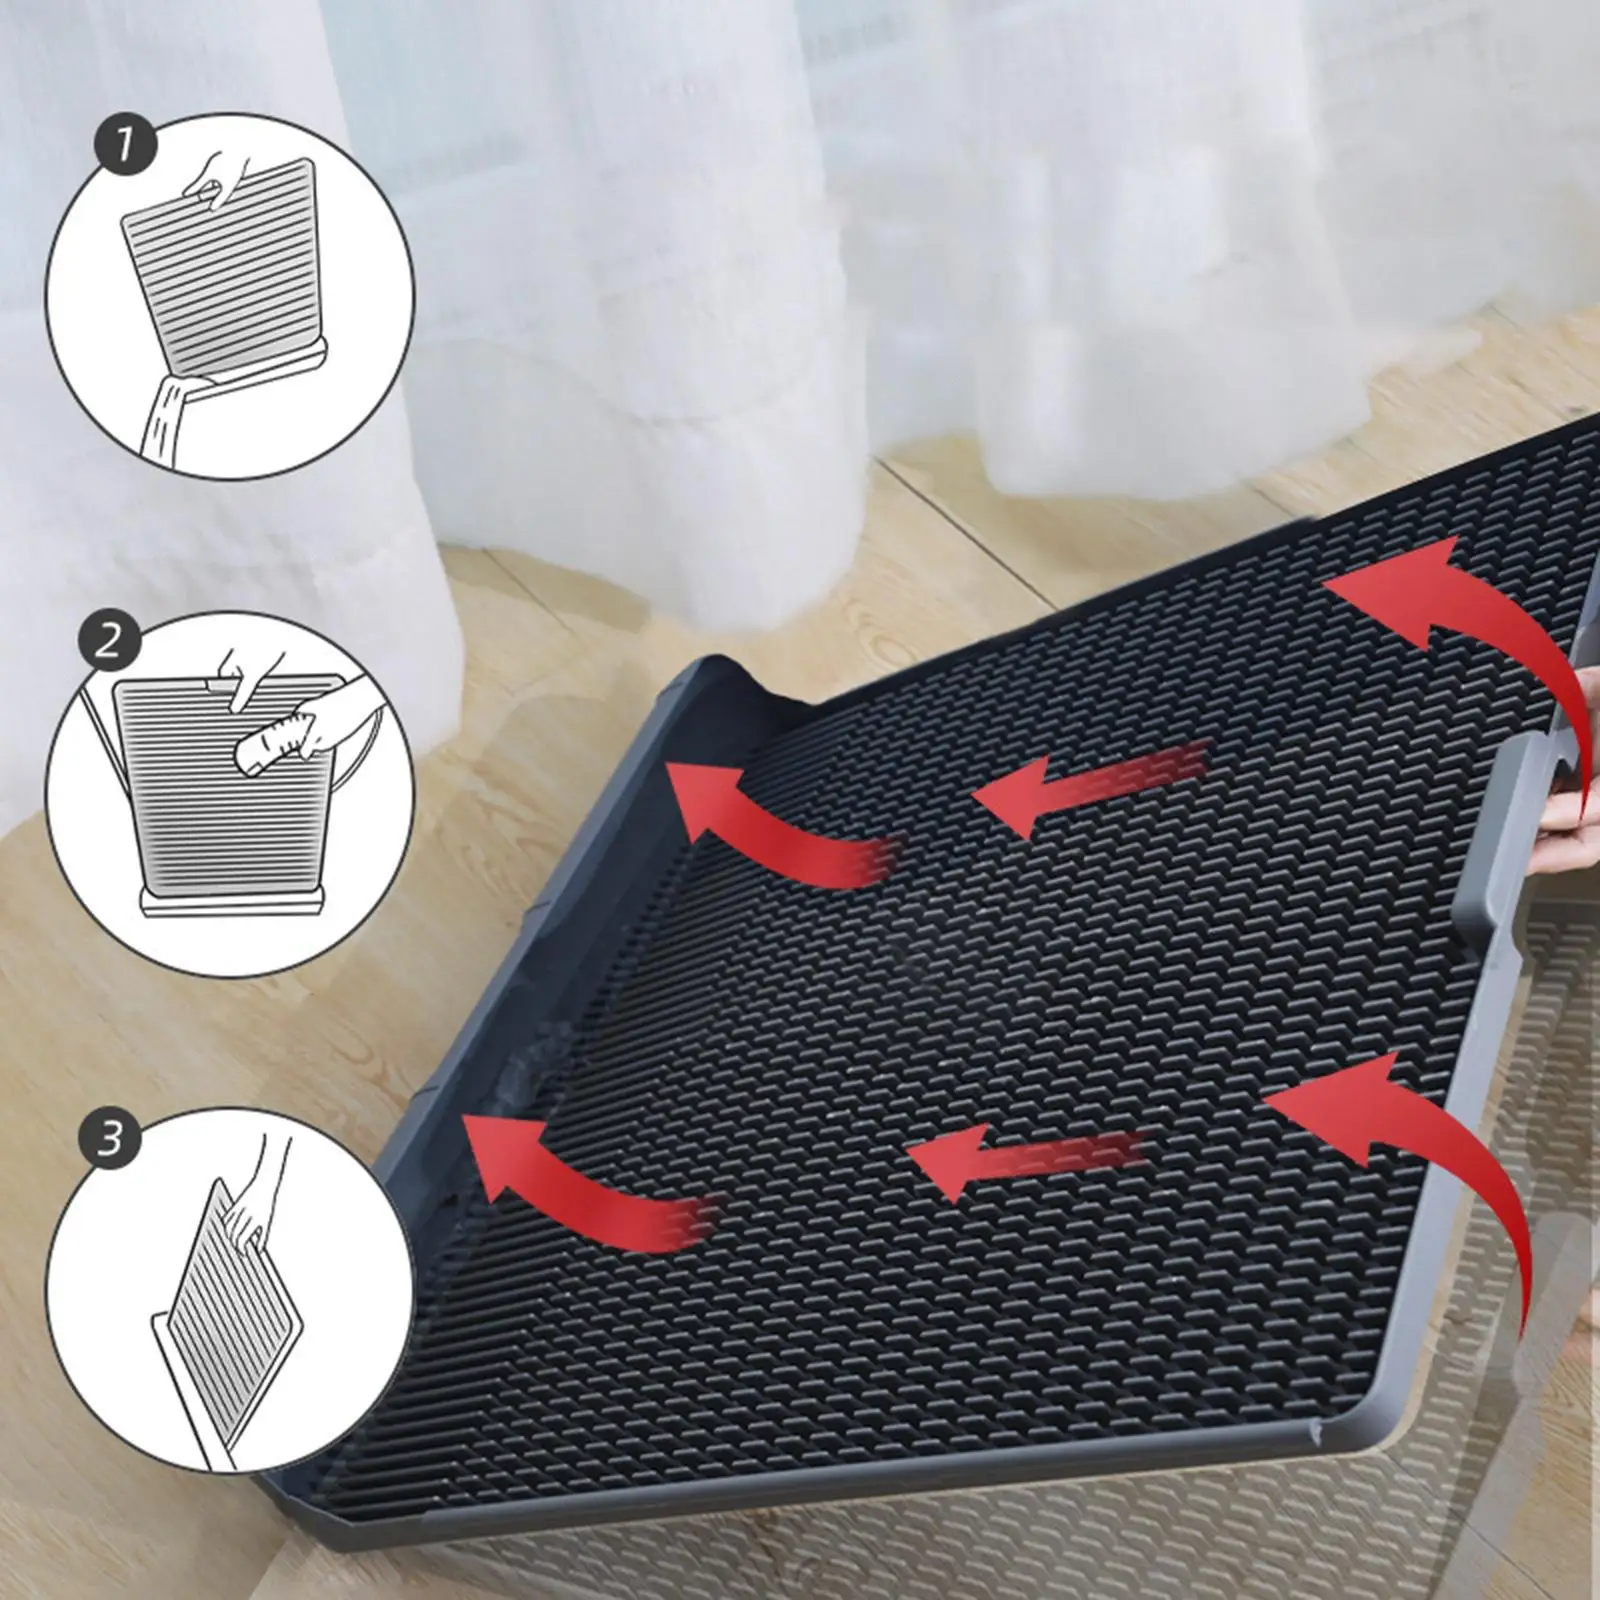 Professional Dog Toilet Potty Reusable Puppy Pee Tray for Small Medium Large Dogs